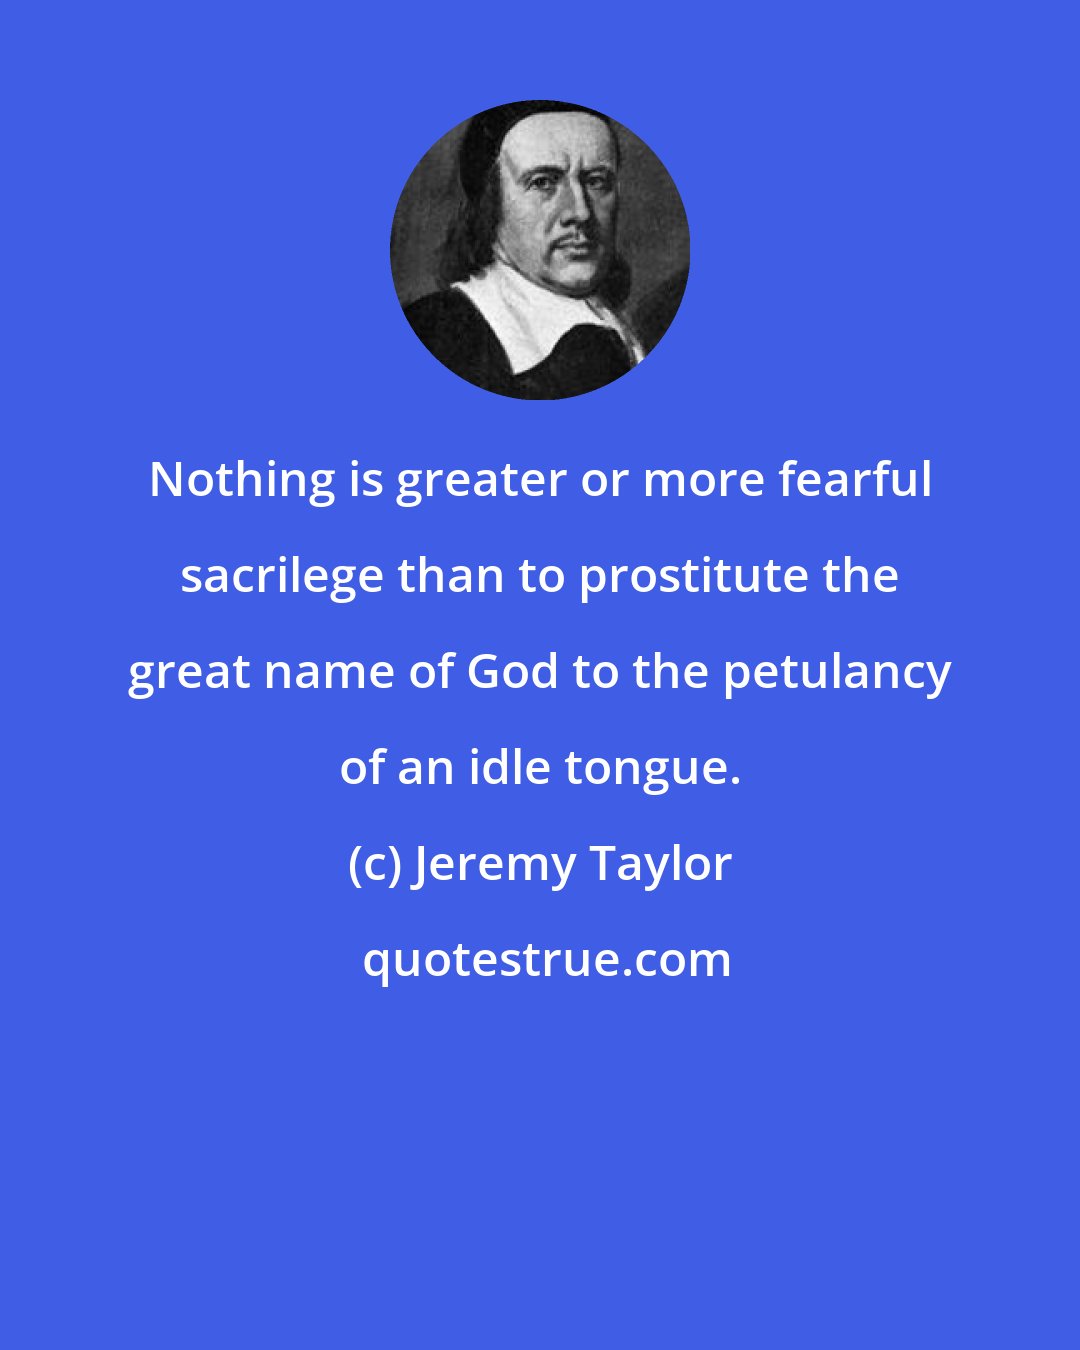 Jeremy Taylor: Nothing is greater or more fearful sacrilege than to prostitute the great name of God to the petulancy of an idle tongue.